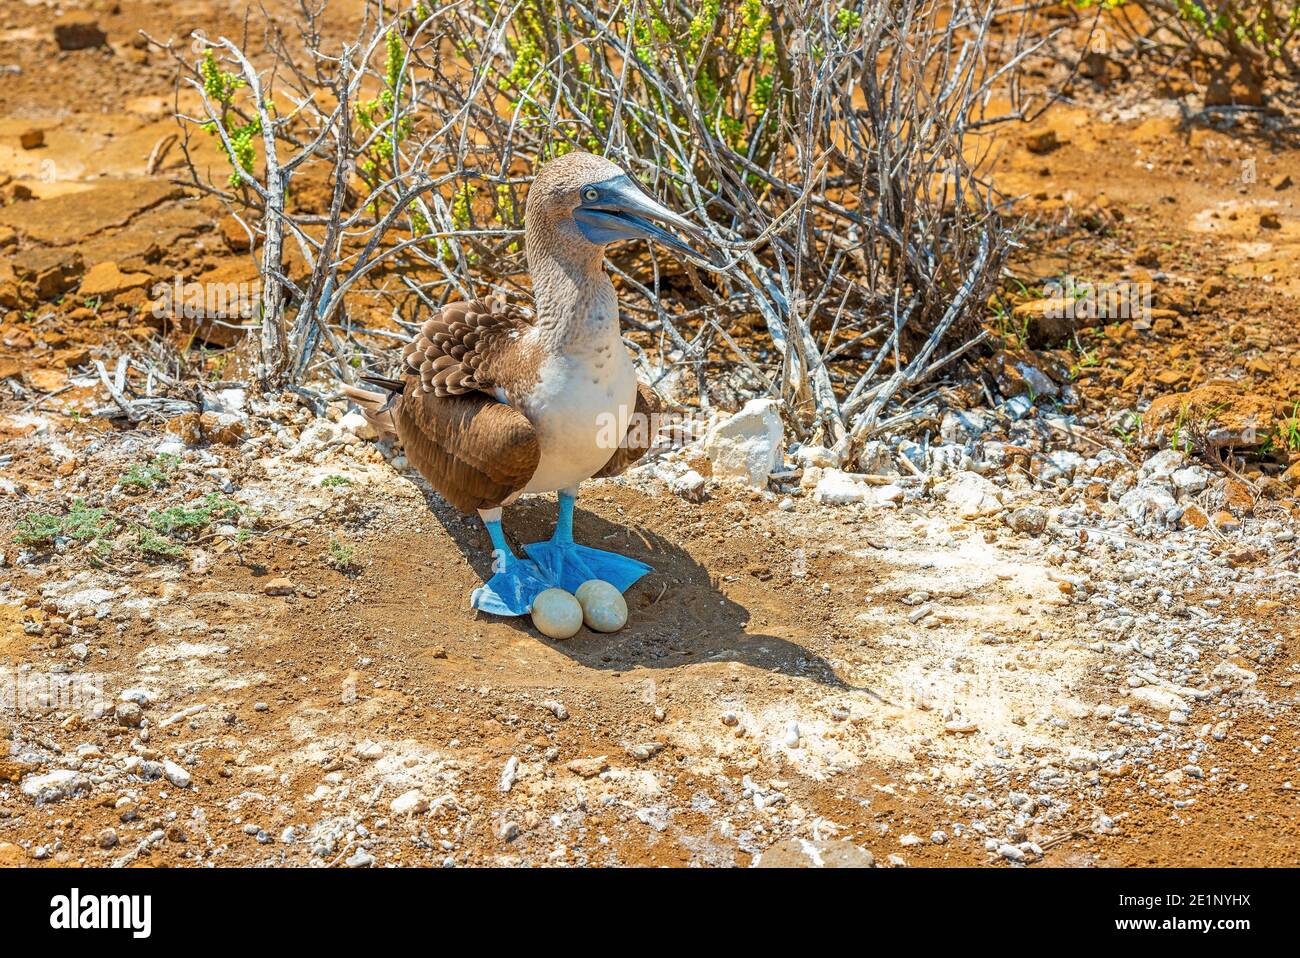 Blue Footed booby (Sula nebouxii) on nest with two eggs, Punta Pitt, San Cristobal island, Galapagos national park, Ecuador. Stock Photo